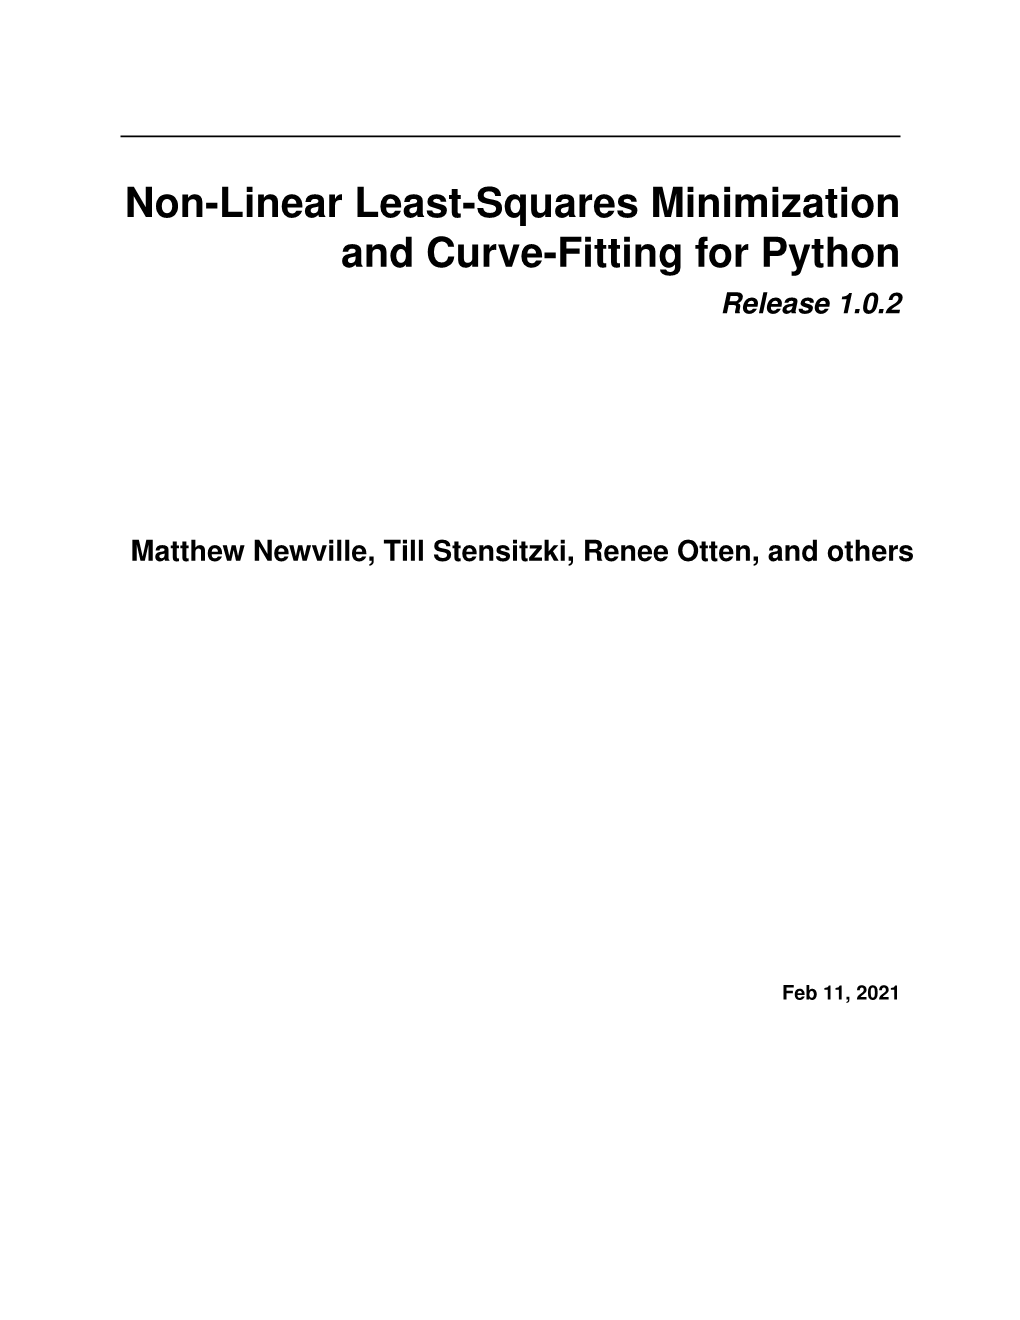 Non-Linear Least-Squares Minimization and Curve-Fitting for Python Release 1.0.2